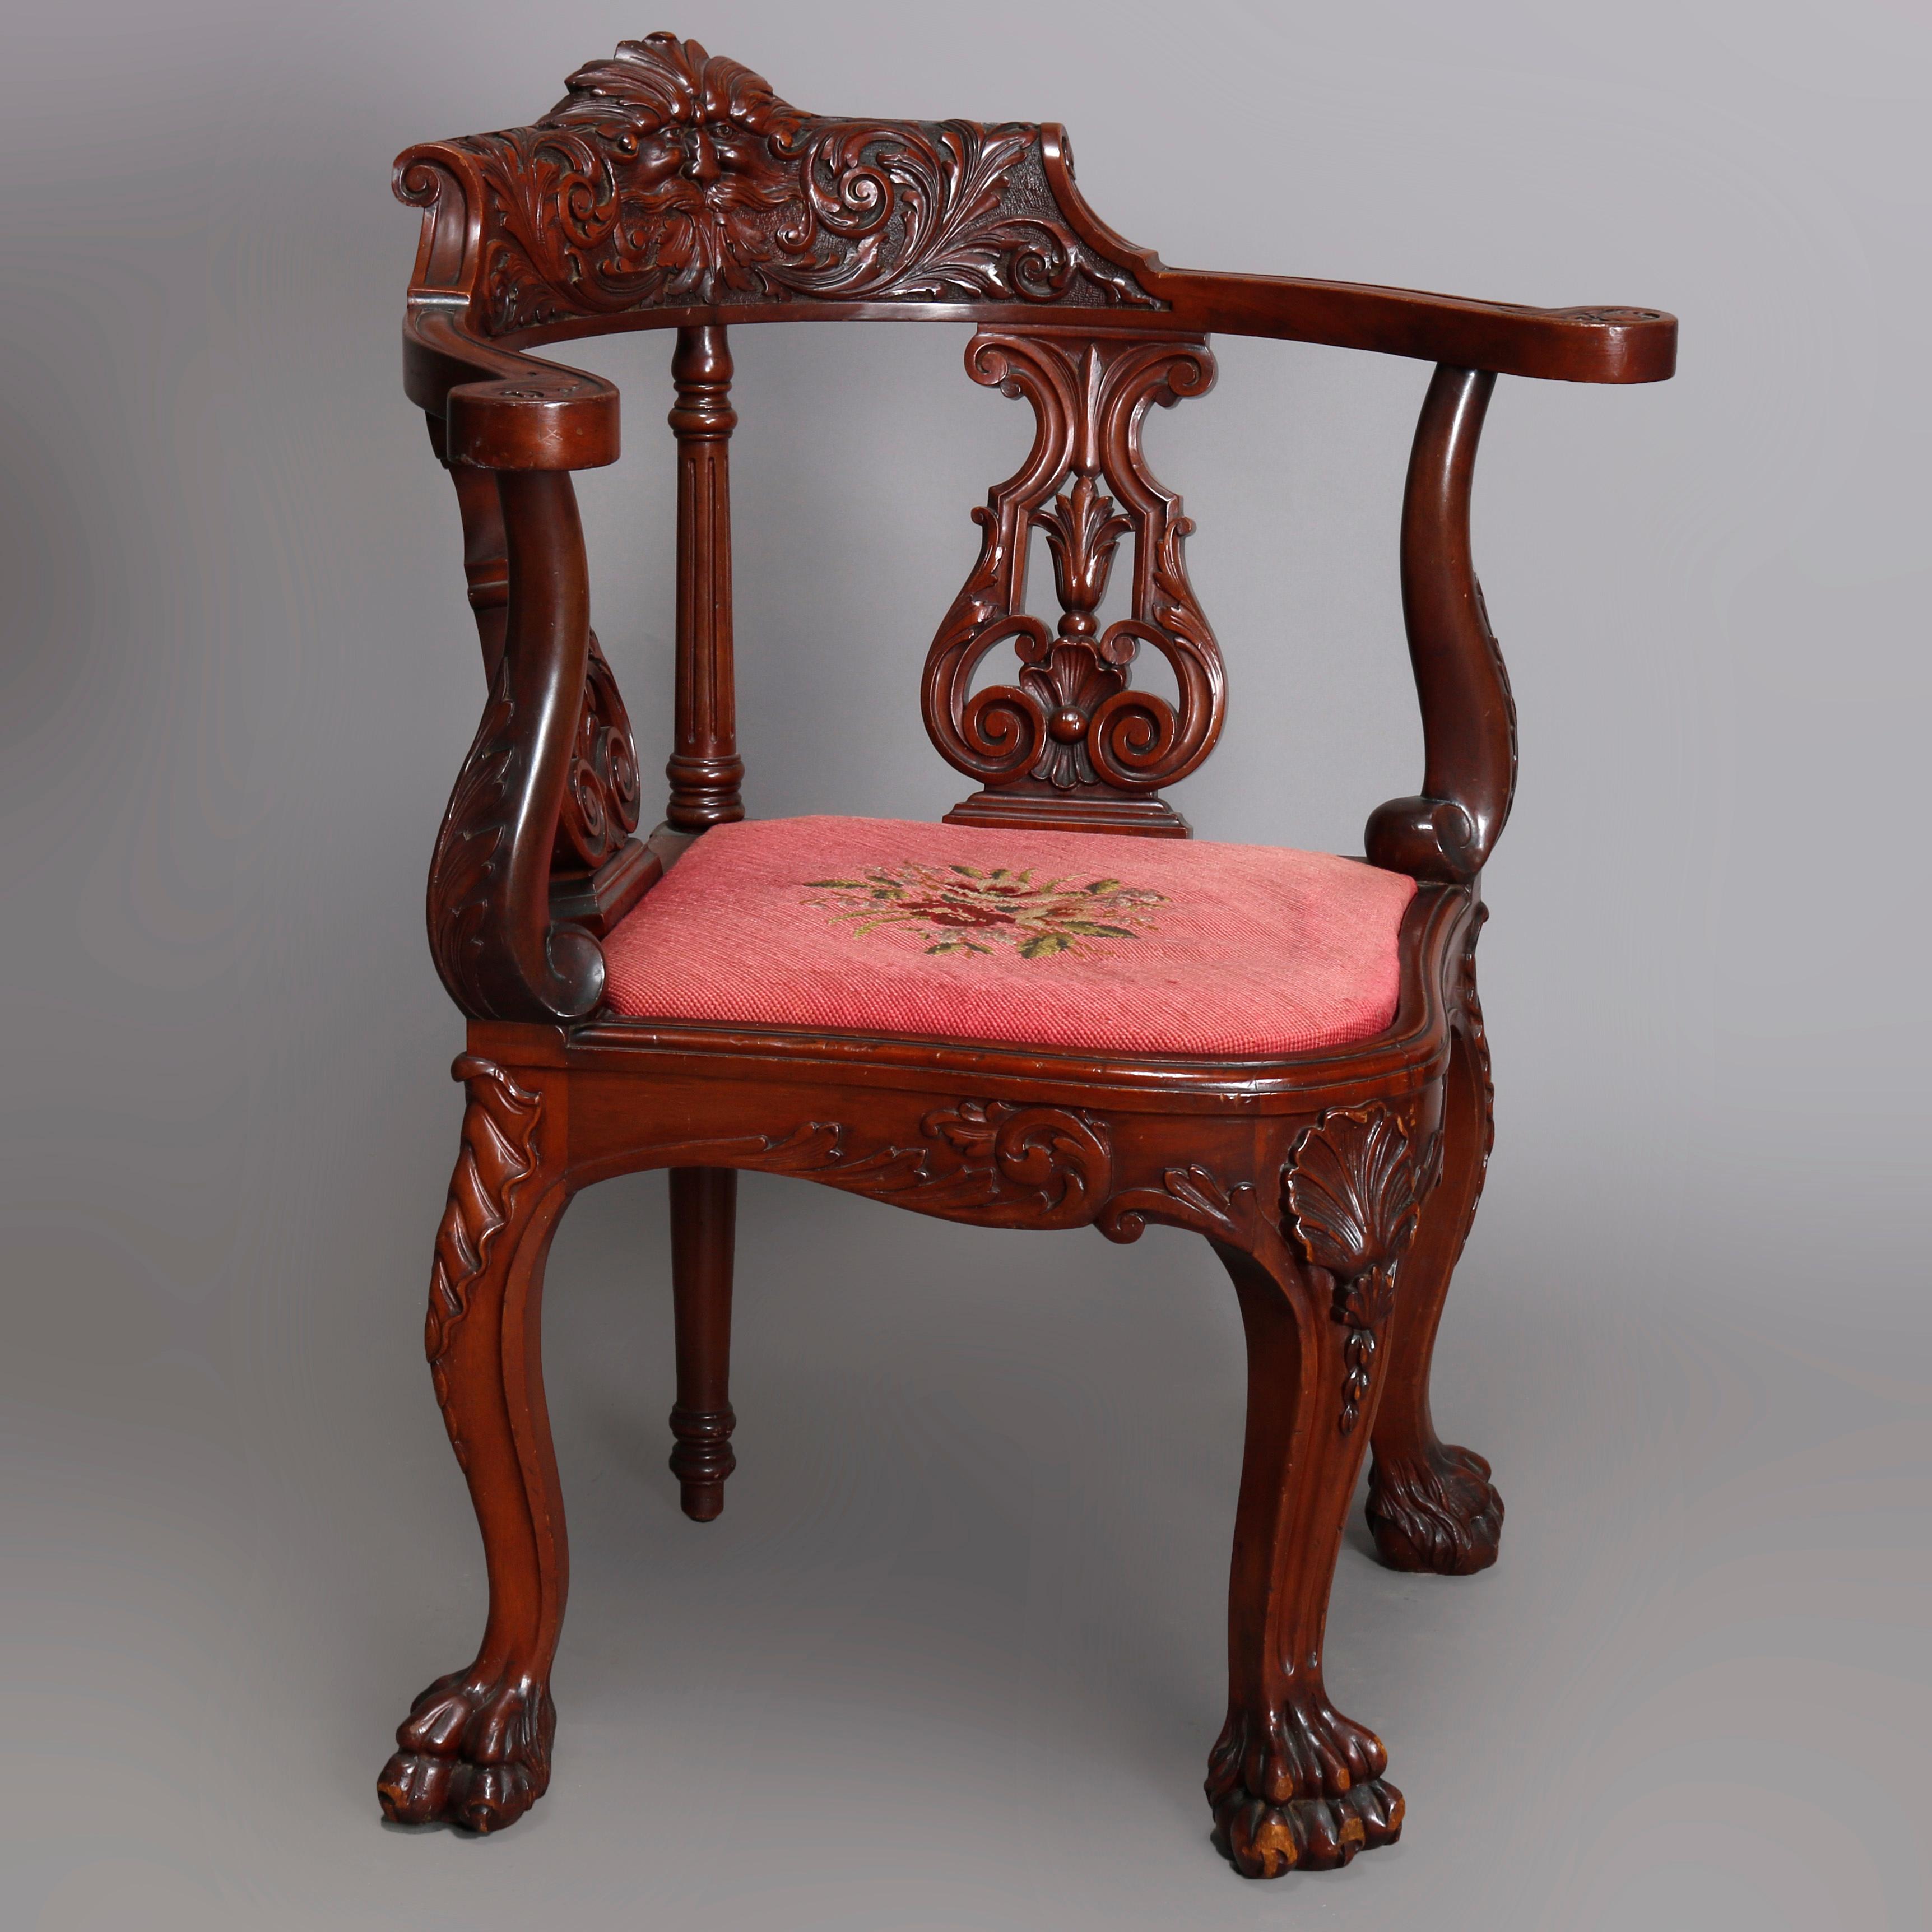 Upholstery Antique R. J. Horner Figural Carved Mahogany North Wind Corner Chair, circa 1890